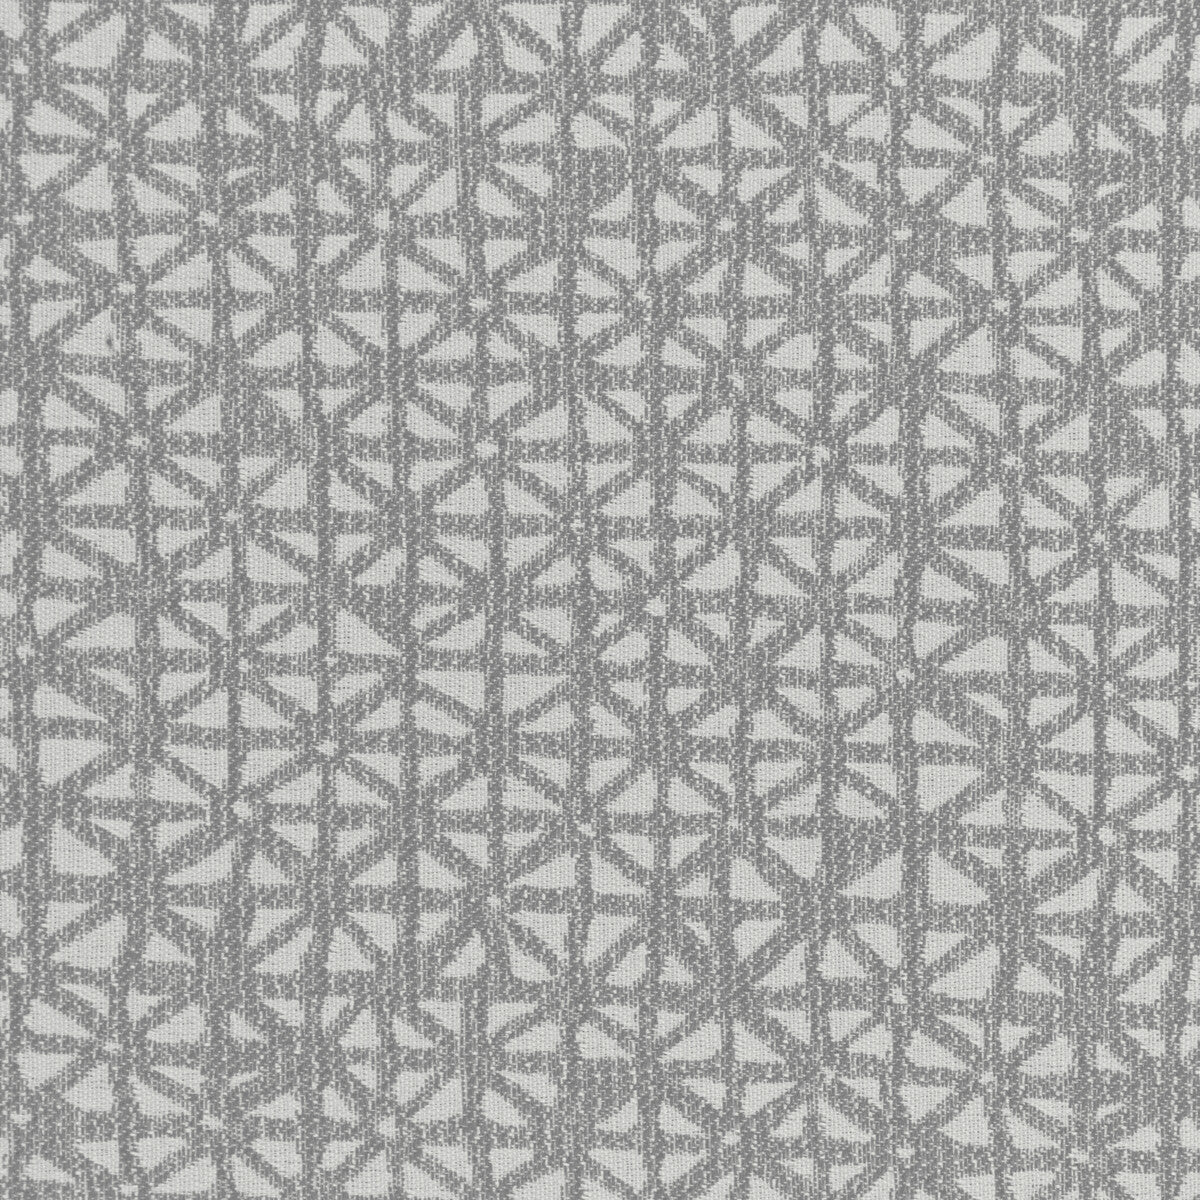 Kinzie fabric in limestone color - pattern 36268.11.0 - by Kravet Contract in the Gis Crypton collection